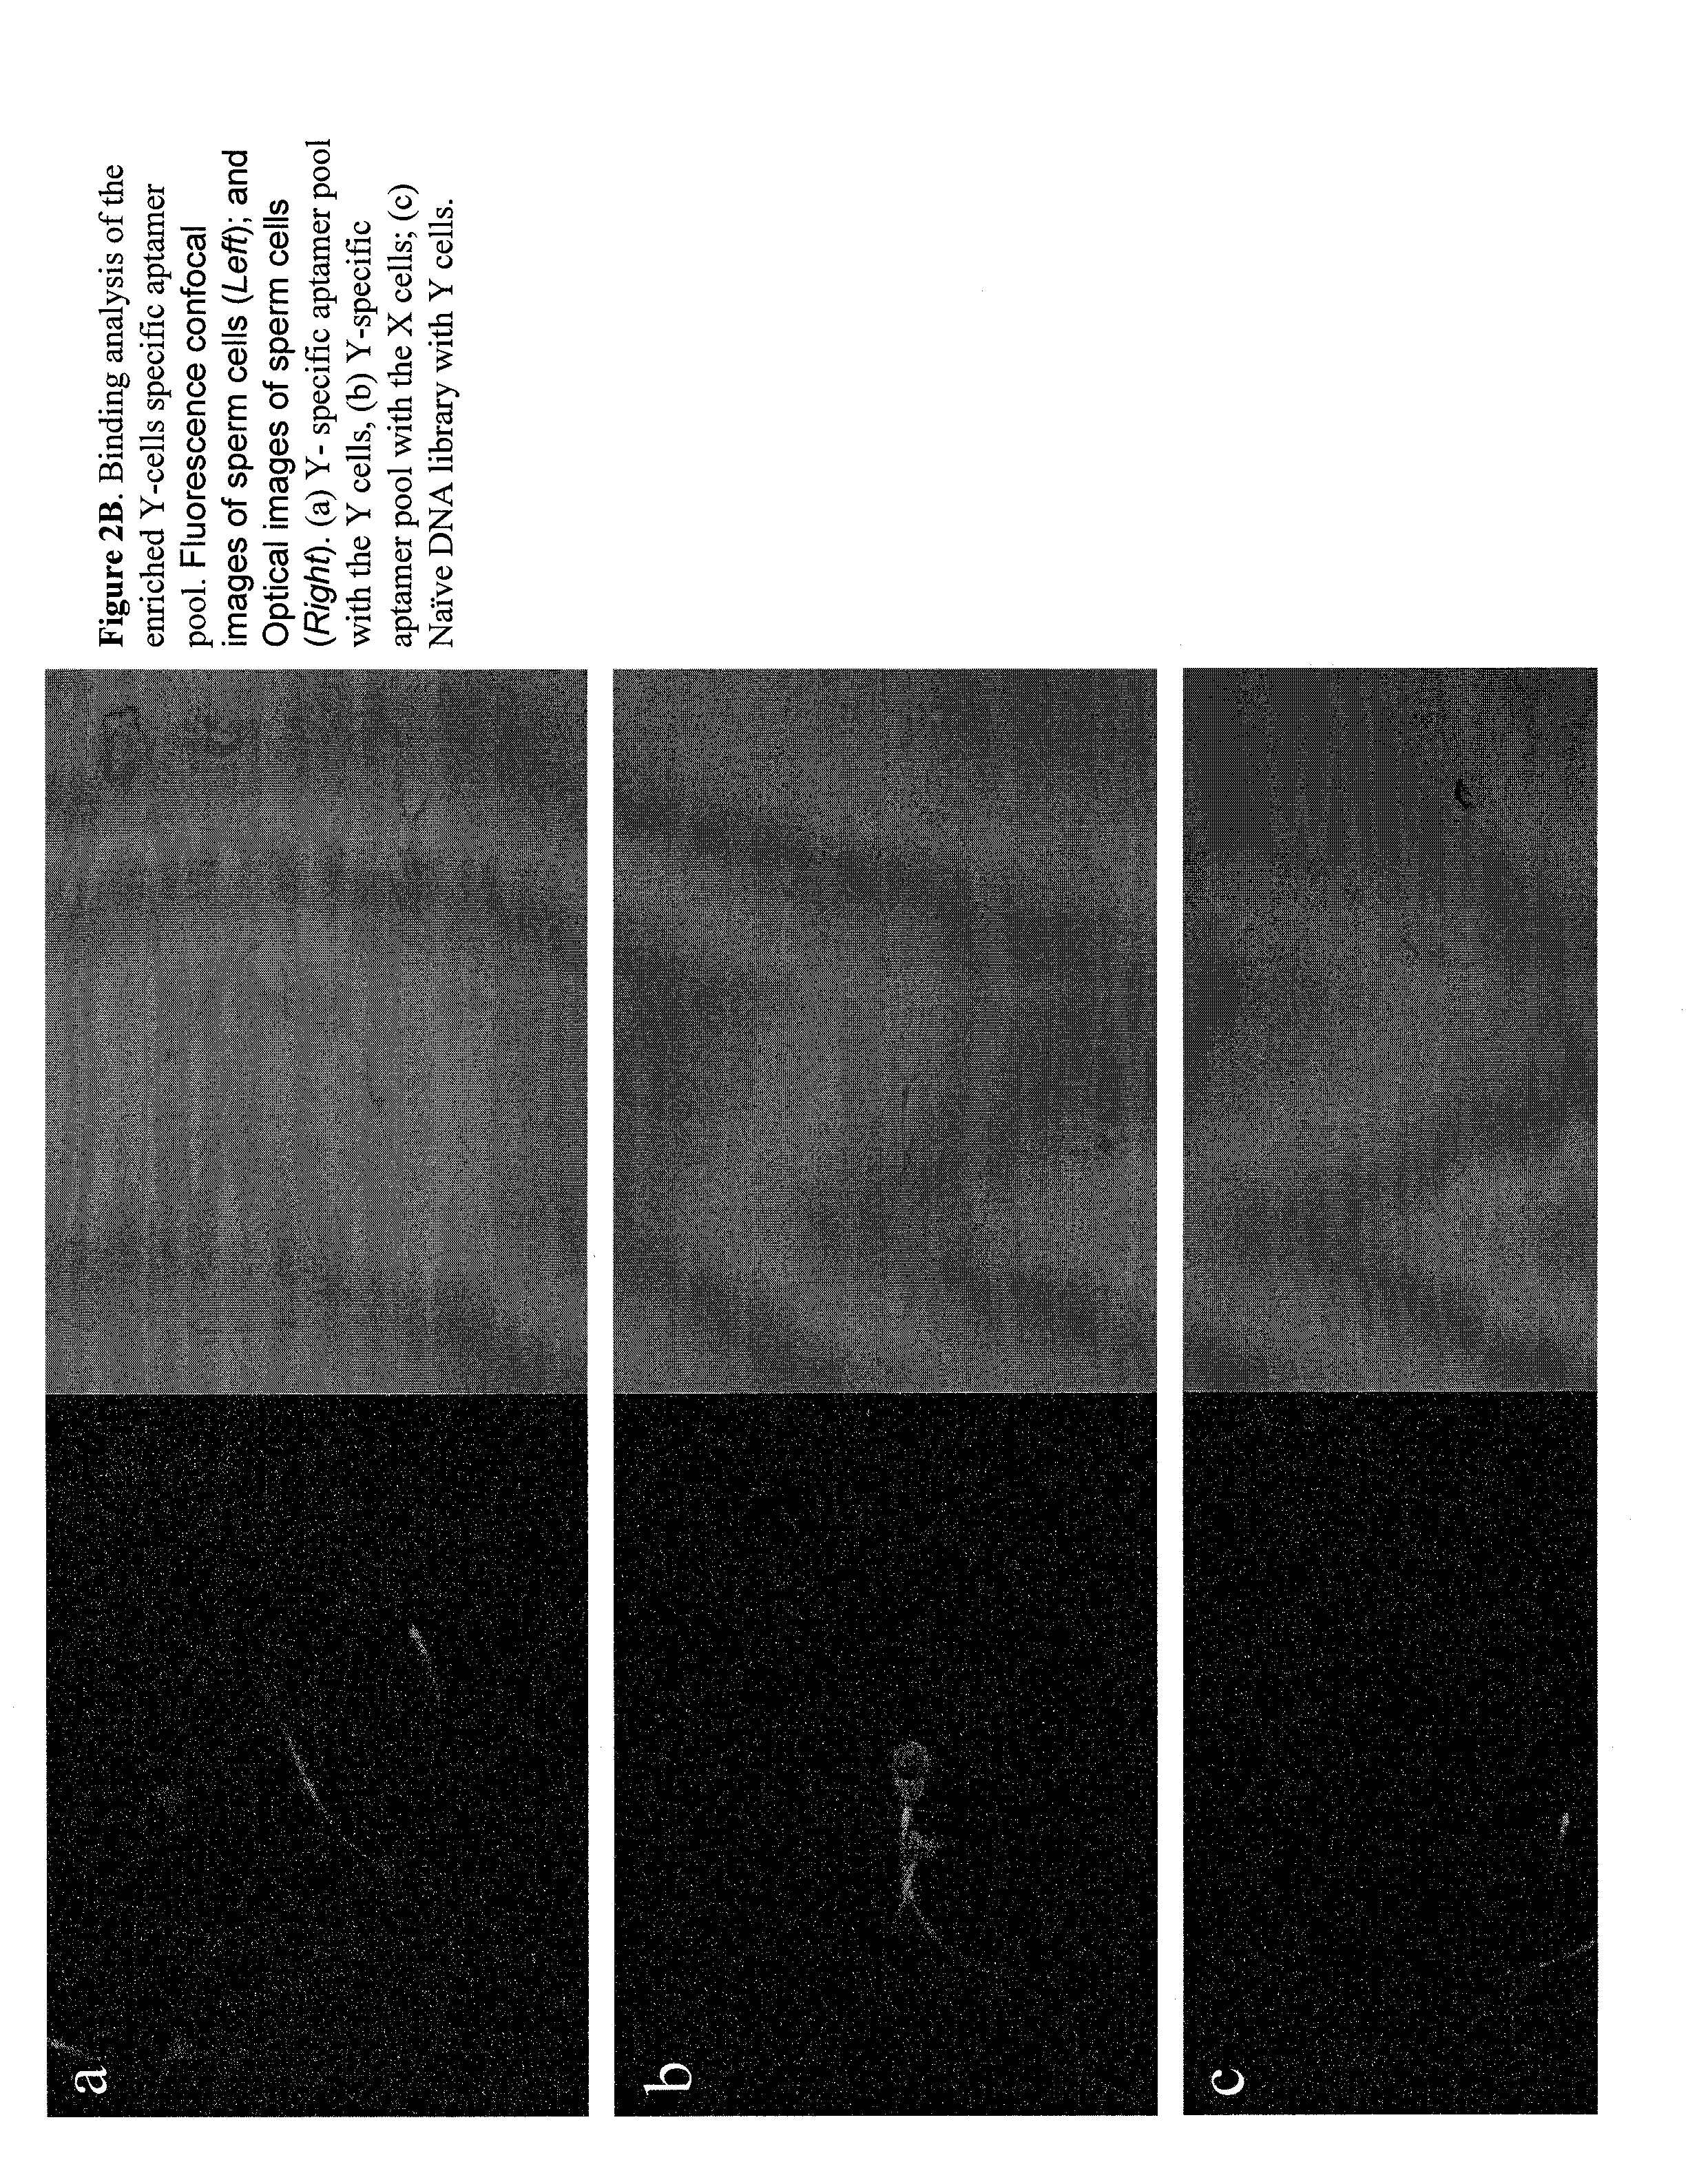 Sperm cell separation methods and compositions containing aptamers or nucleic acid sequences for use therein